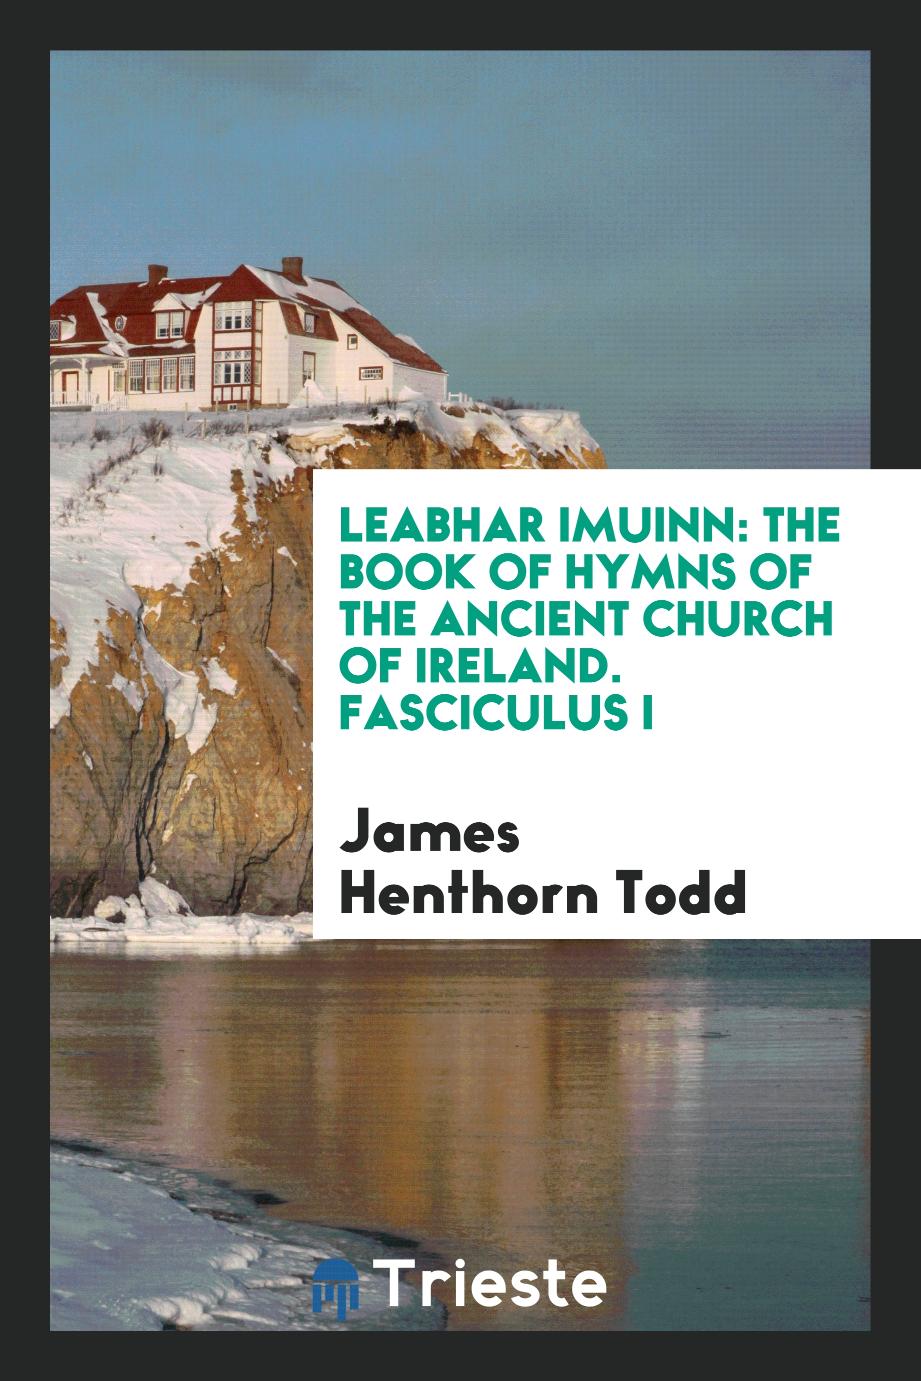 Leabhar Imuinn: The Book of Hymns of the Ancient Church of Ireland. Fasciculus I